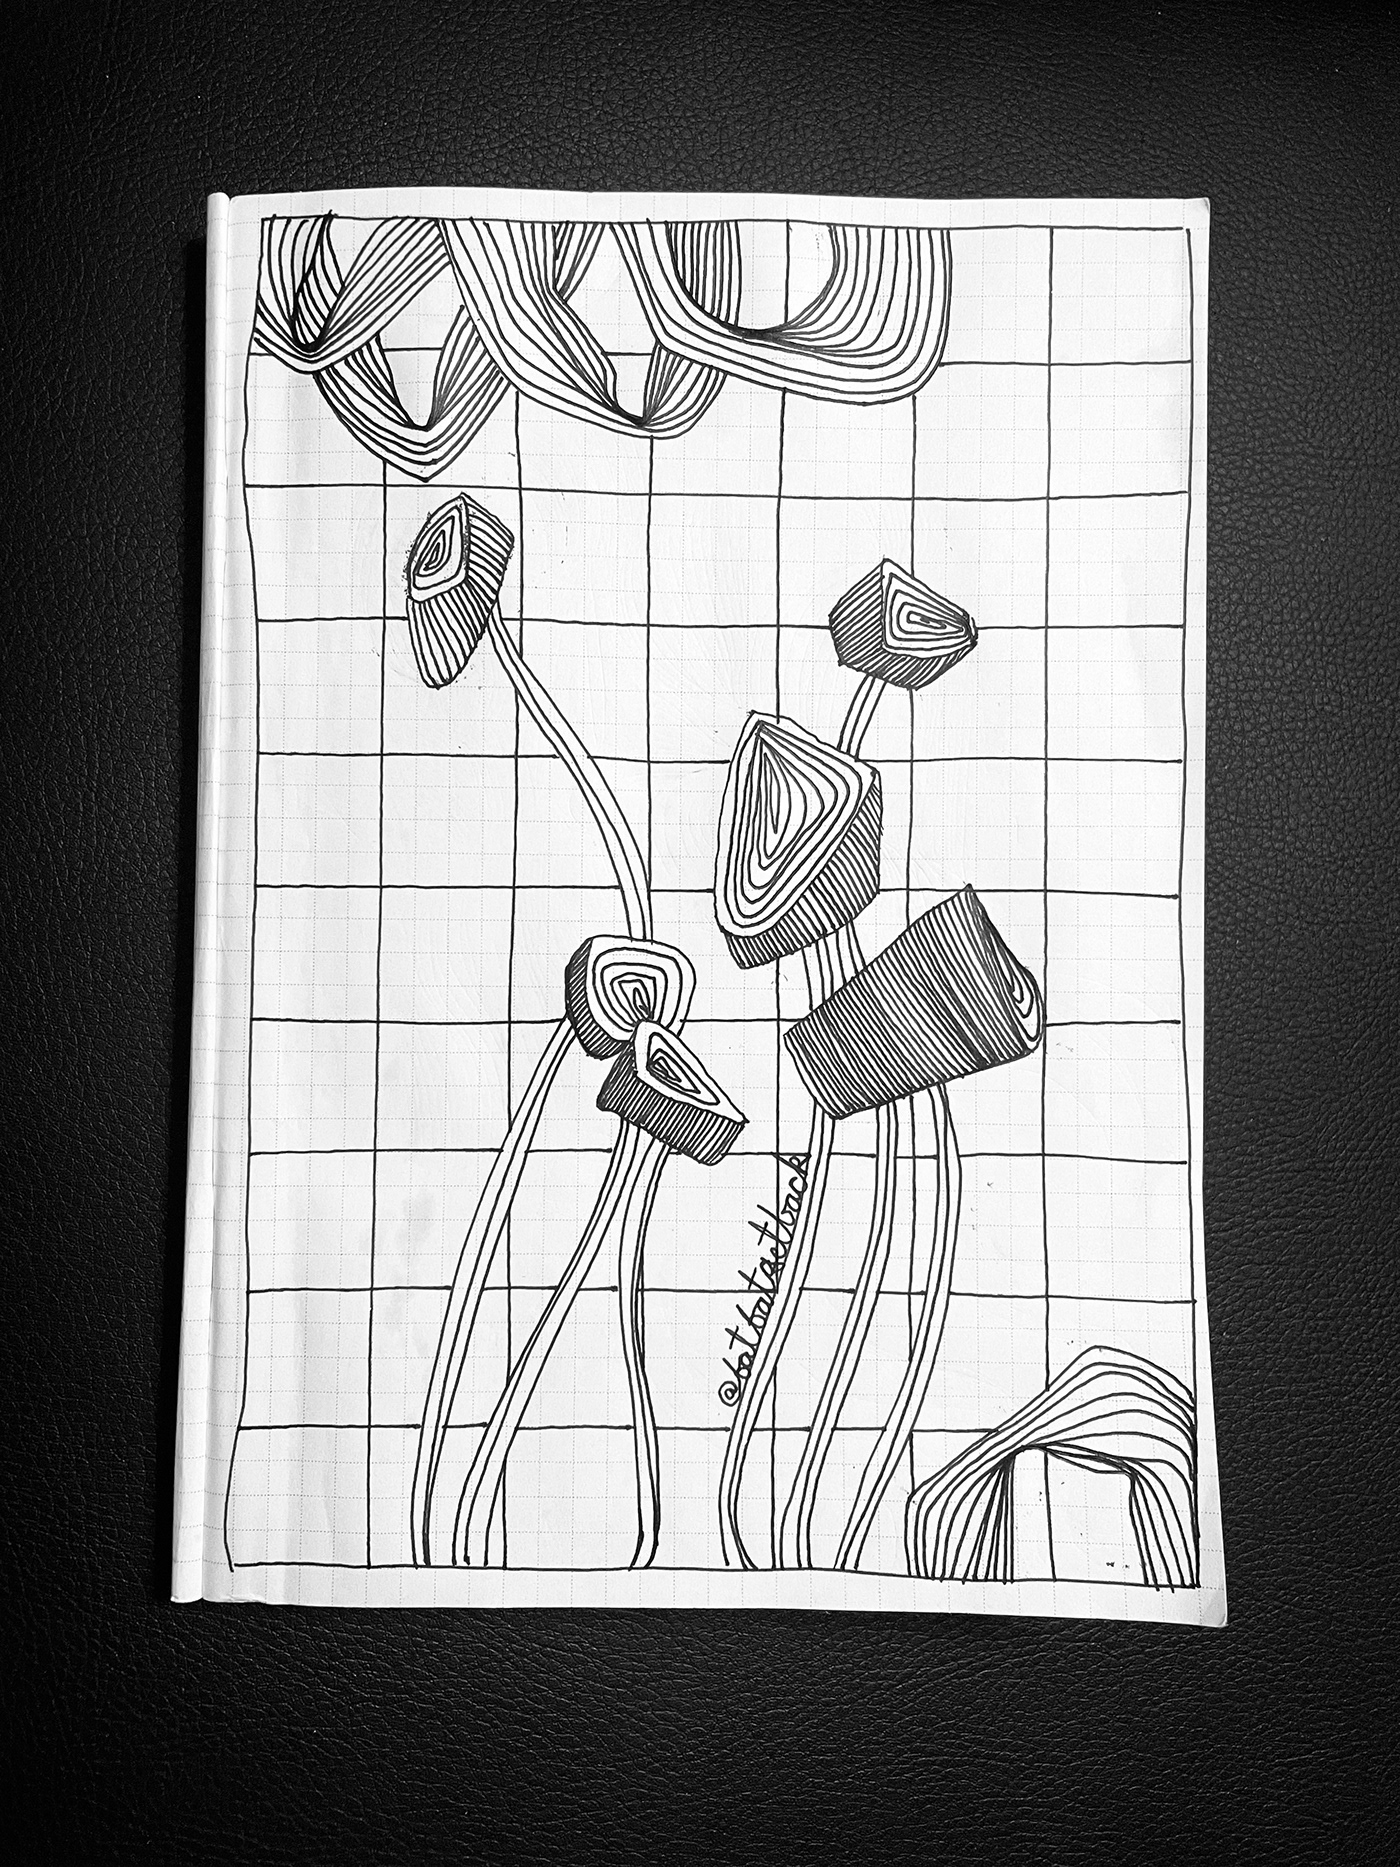 linework lineart linedrawing blackpen abstractart monster OnceUponaTime universe backtopaper BeingHuman linedoodle OUTTASPACE penandpaper   Zendoodle sketch quicksketch dailysketch paperdrawing handdrawings fatfatgetback pendrawing art pieces blackandwhite recording memories